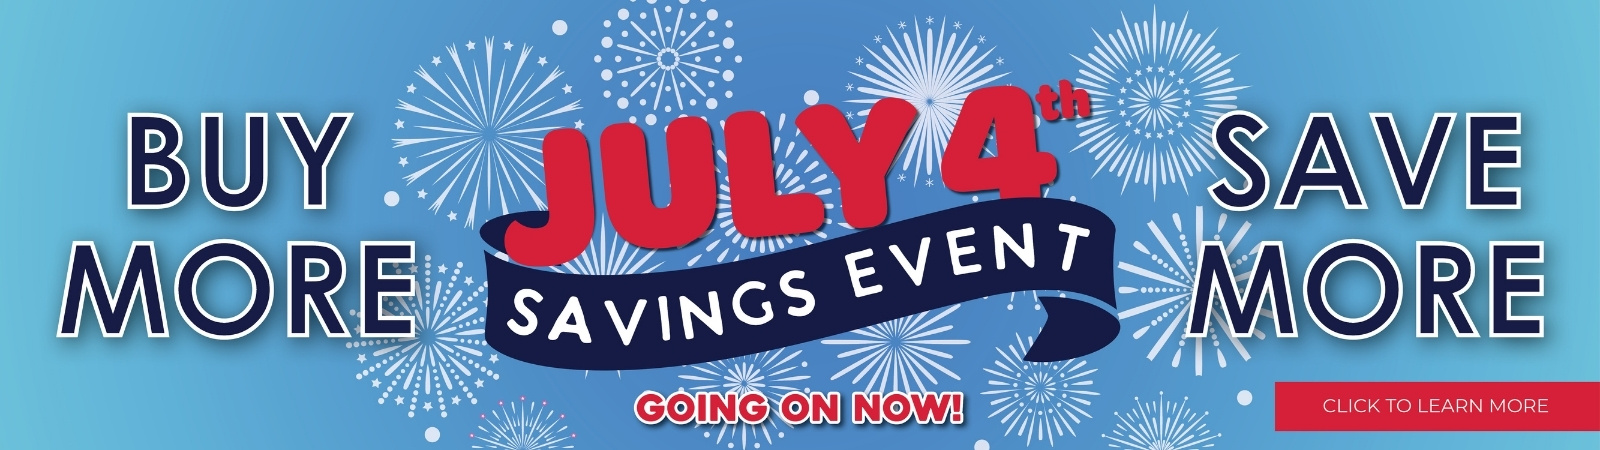 SAVE MORE during our 4th of July SAVINGS Event! 